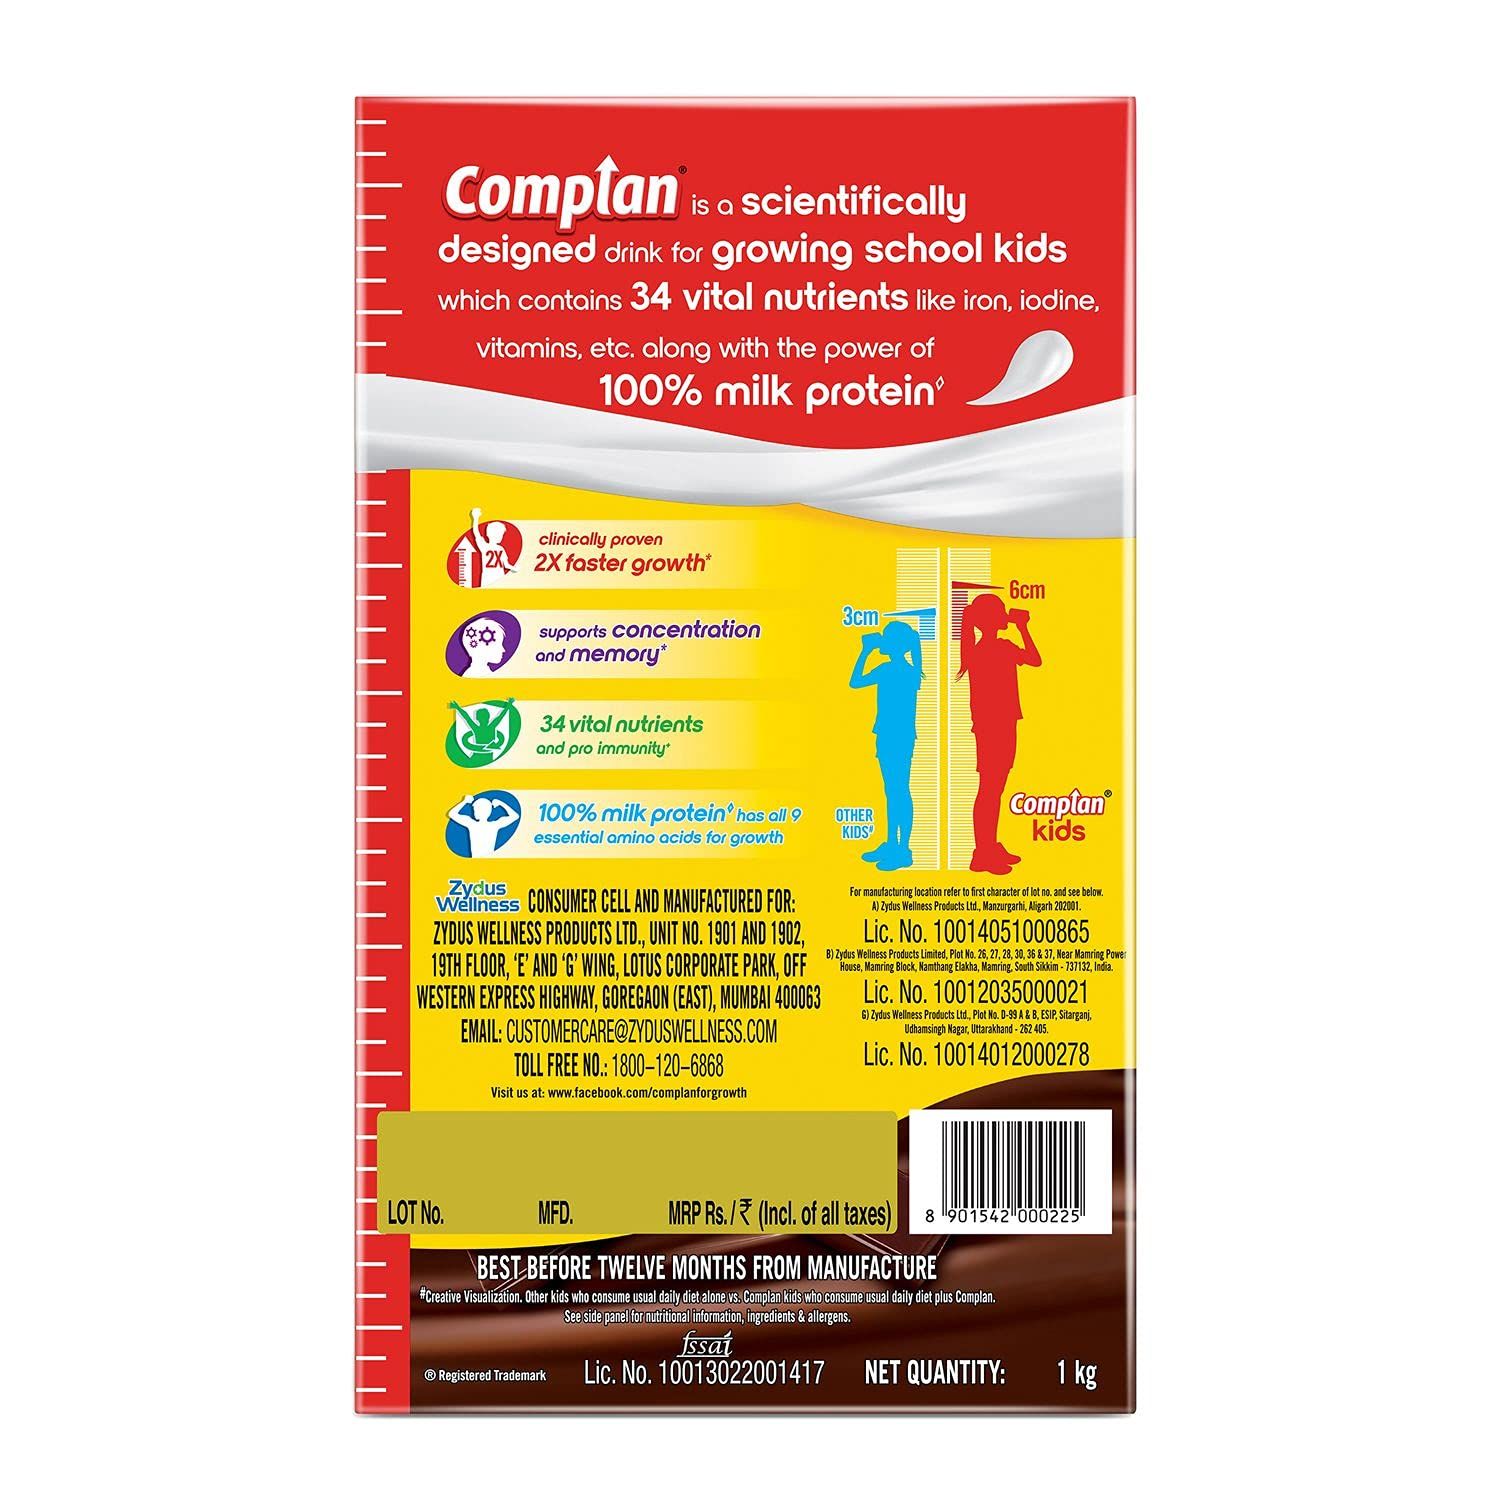 Complan Nutrition and Health Drink Royale Chocolate Image